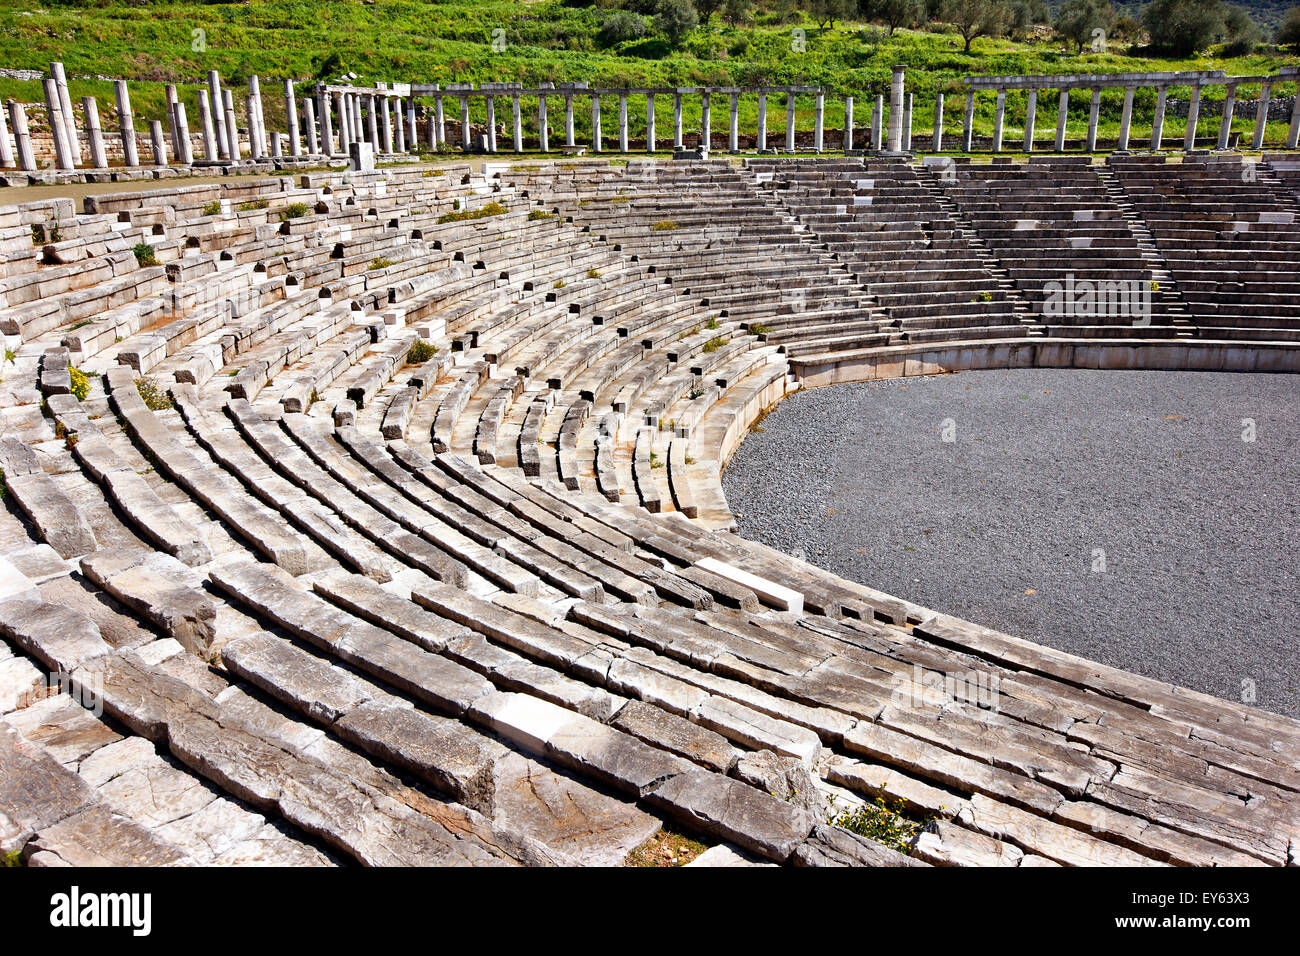 The Stadium in the archaeological site of Messene (or 'Messini'), Messinia Prefecture, Greece. Stock Photo